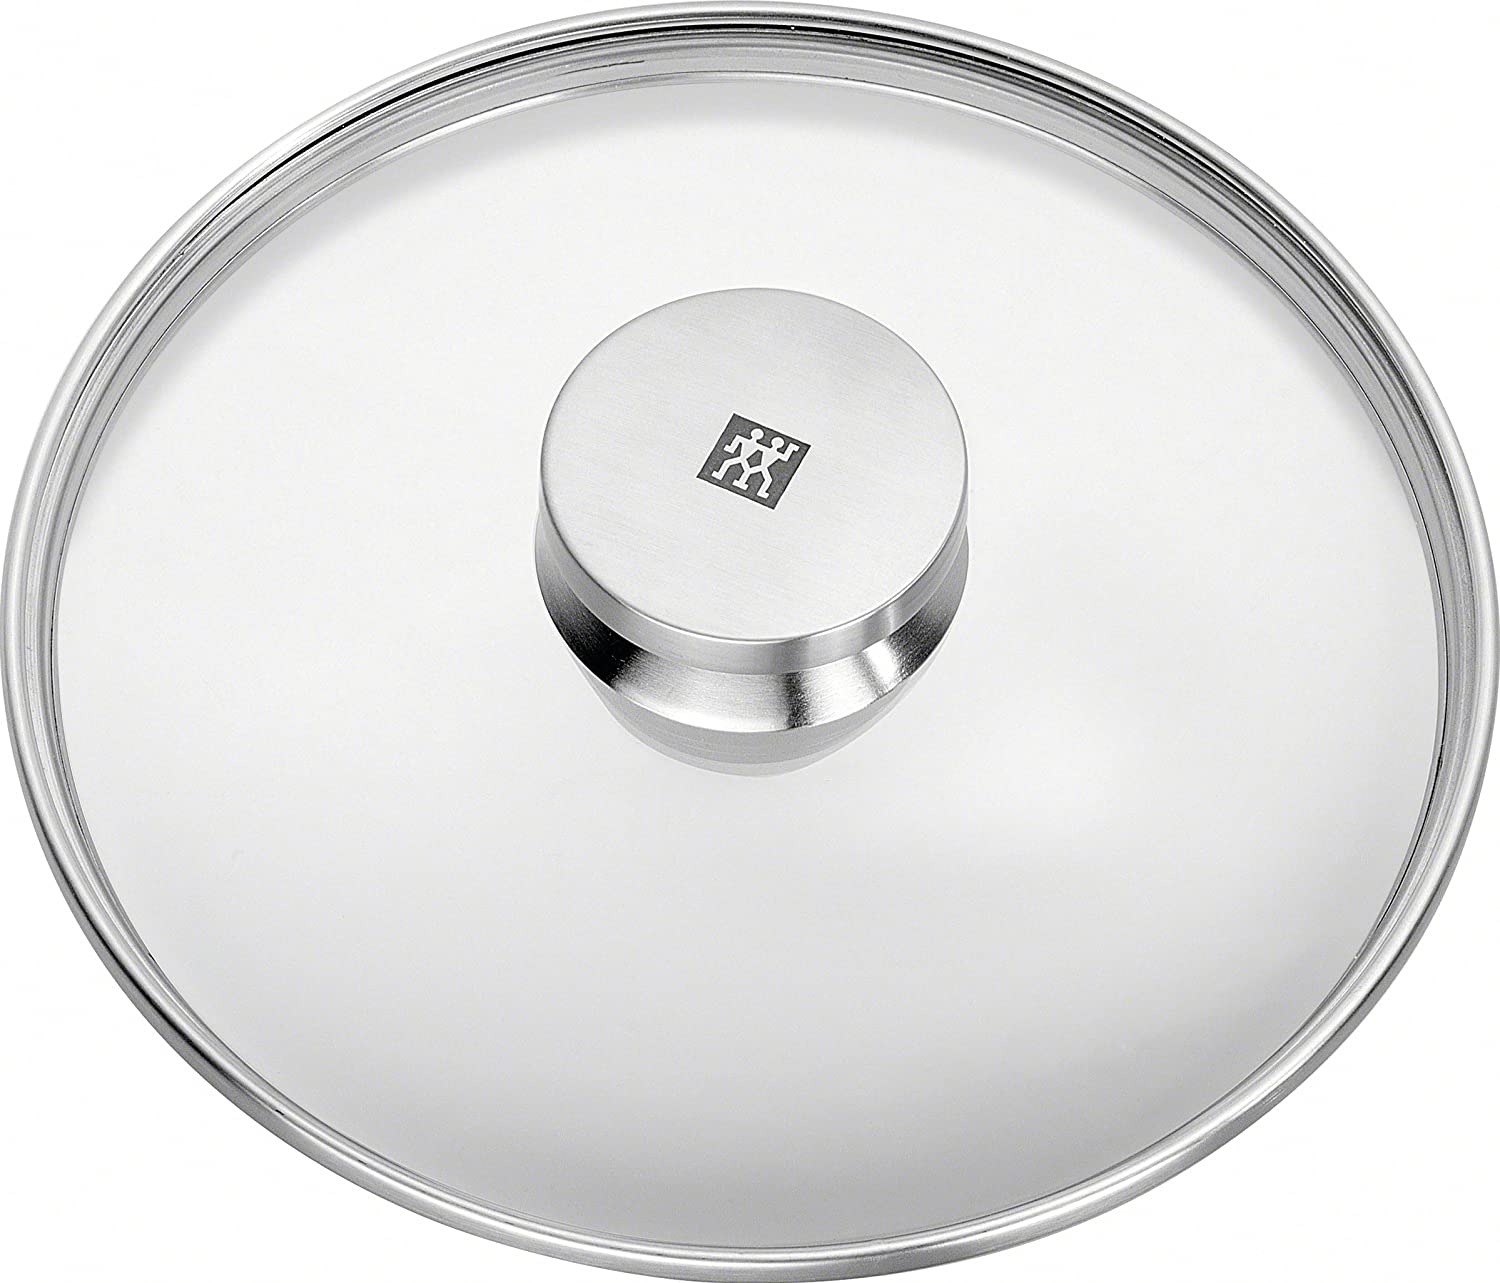 Zwilling 40990-920-0 lid, stainless steel, ø20cm